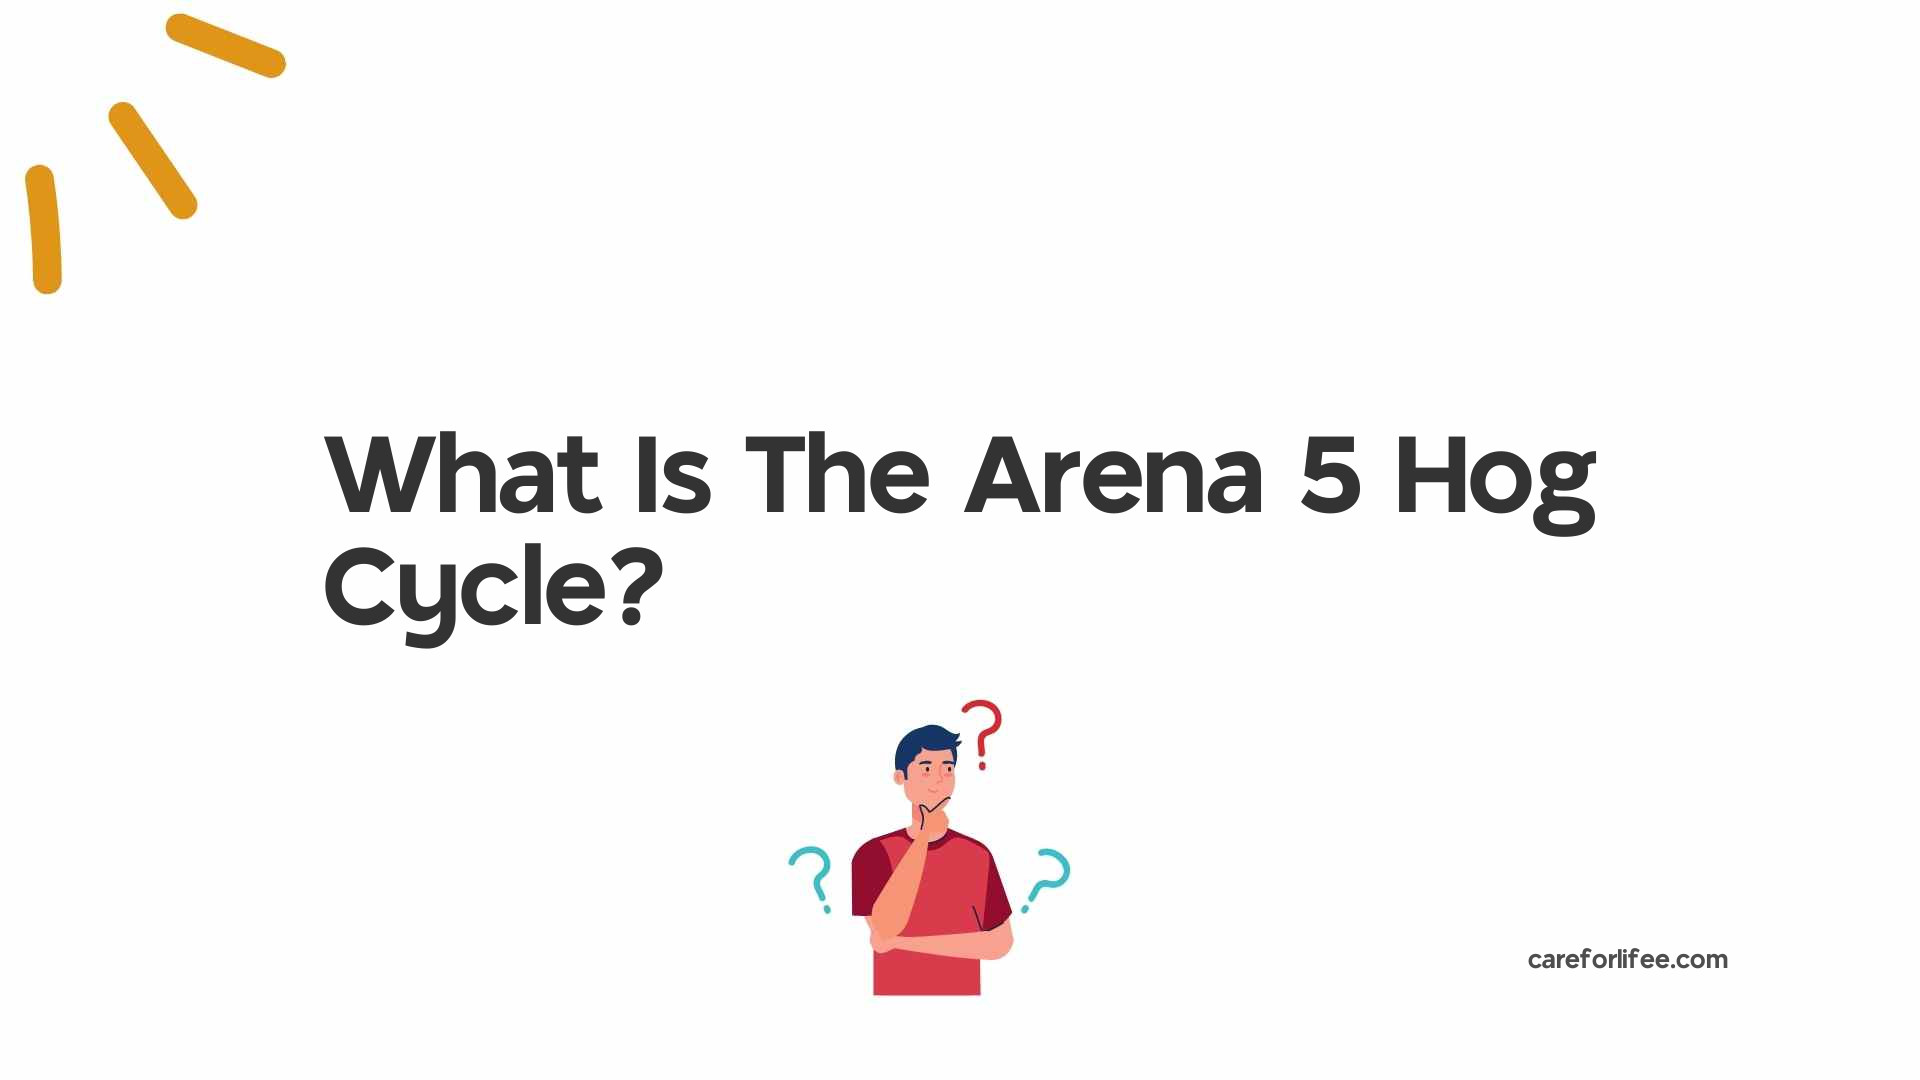 What Is The Arena 5 Hog Cycle?